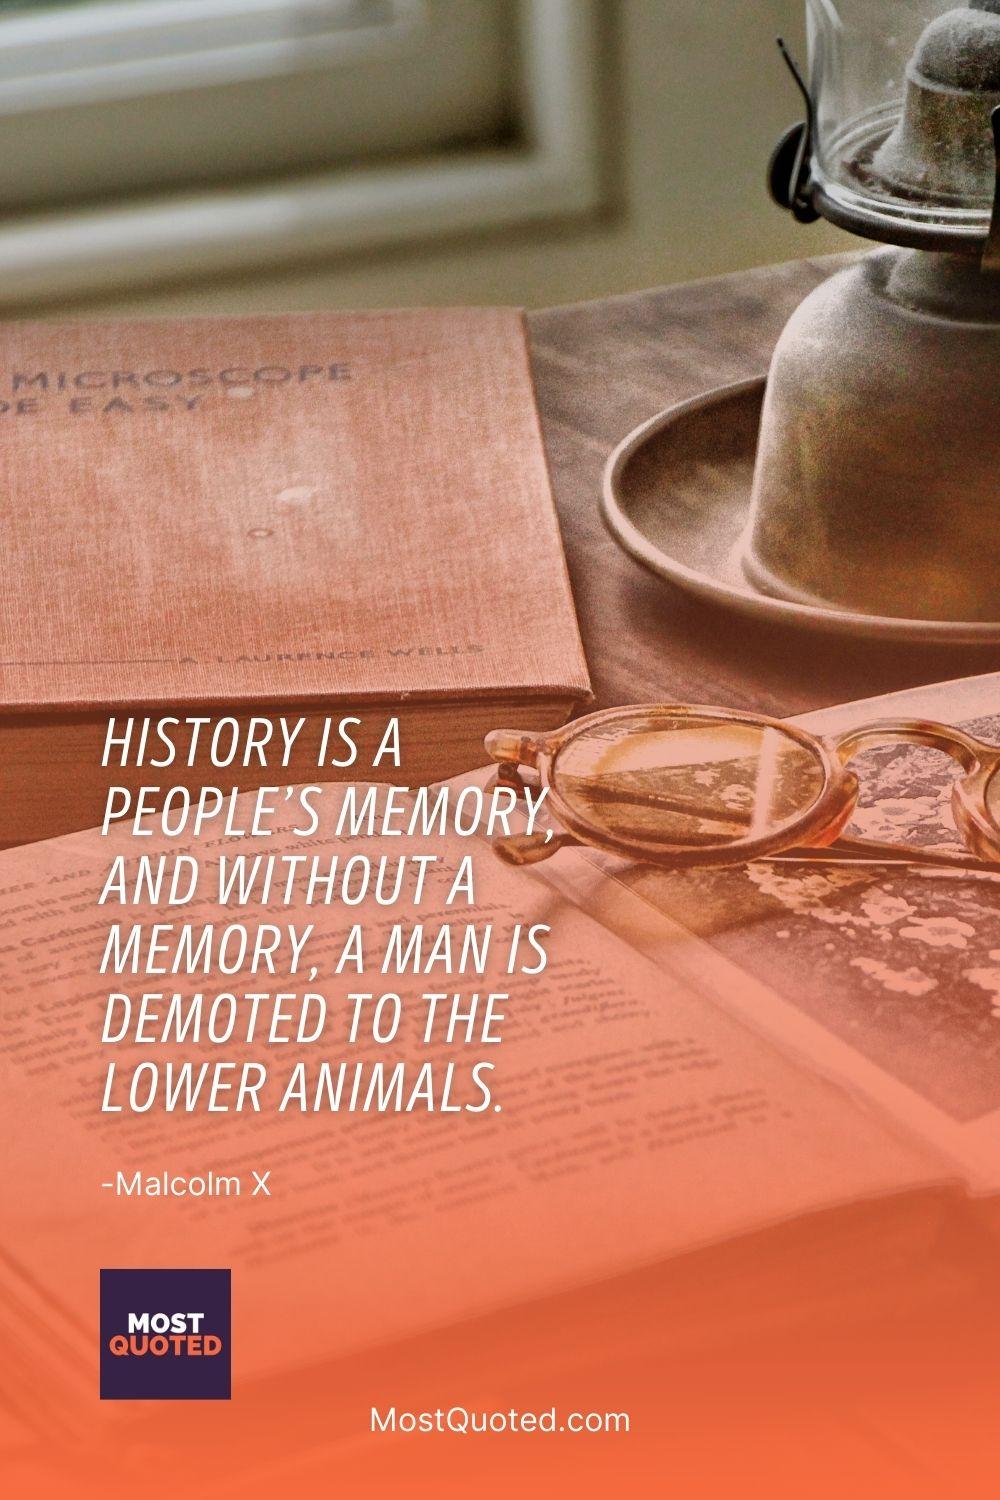 History is a people’s memory, and without a memory, a man is demoted to the lower animals. - Malcolm X